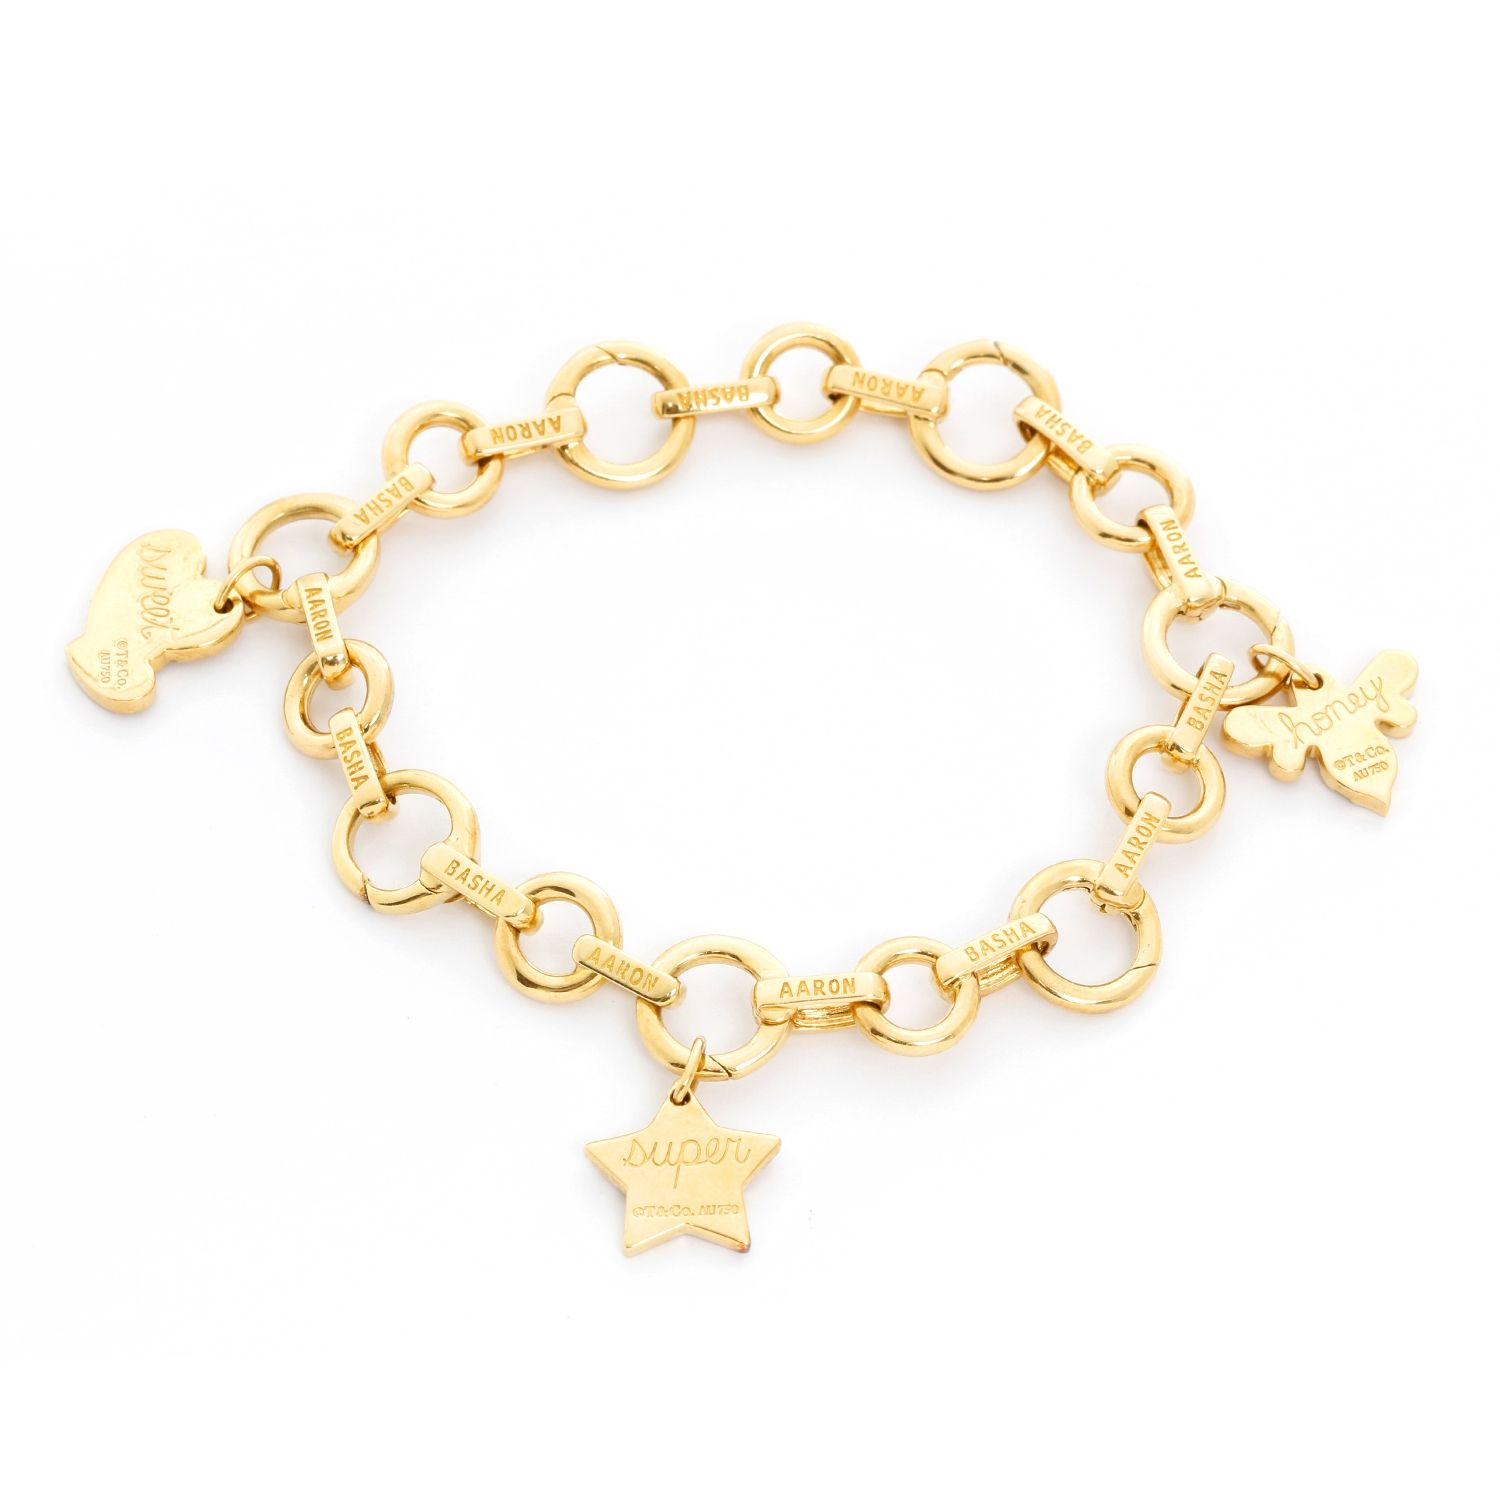 Vintage Tiffany & Co. 14k Yellow Gold Bracelet with Charms